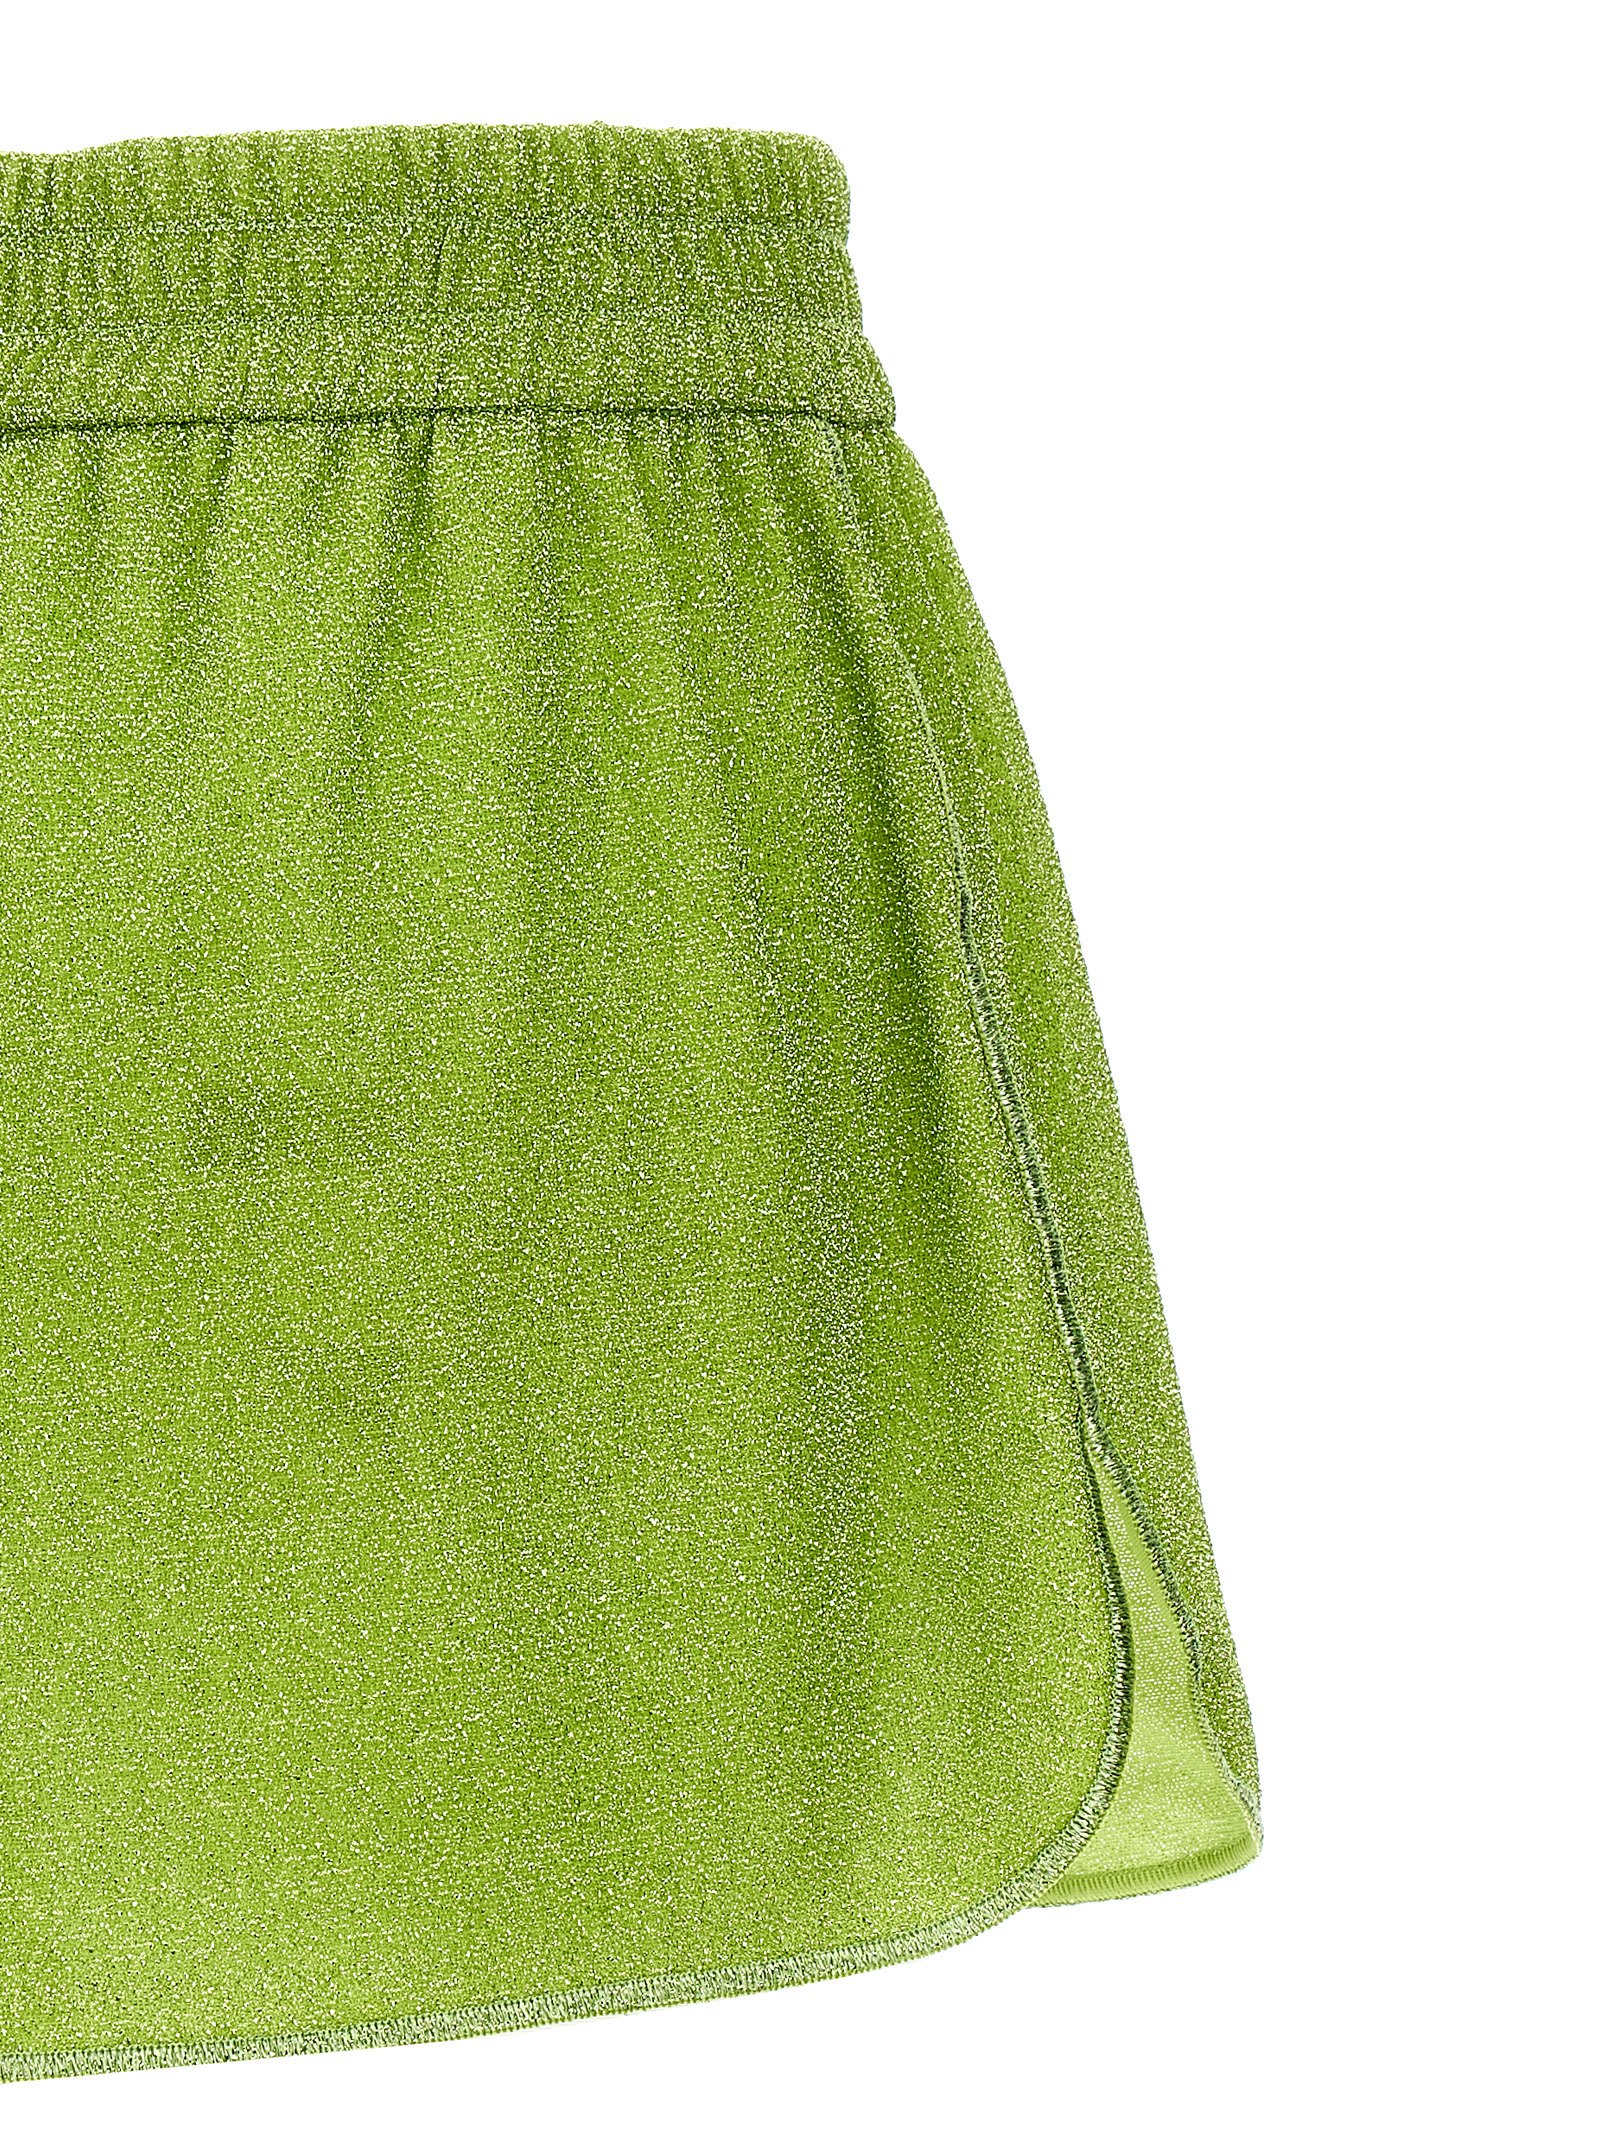 Shop Oseree Lumiere Shorts In Green